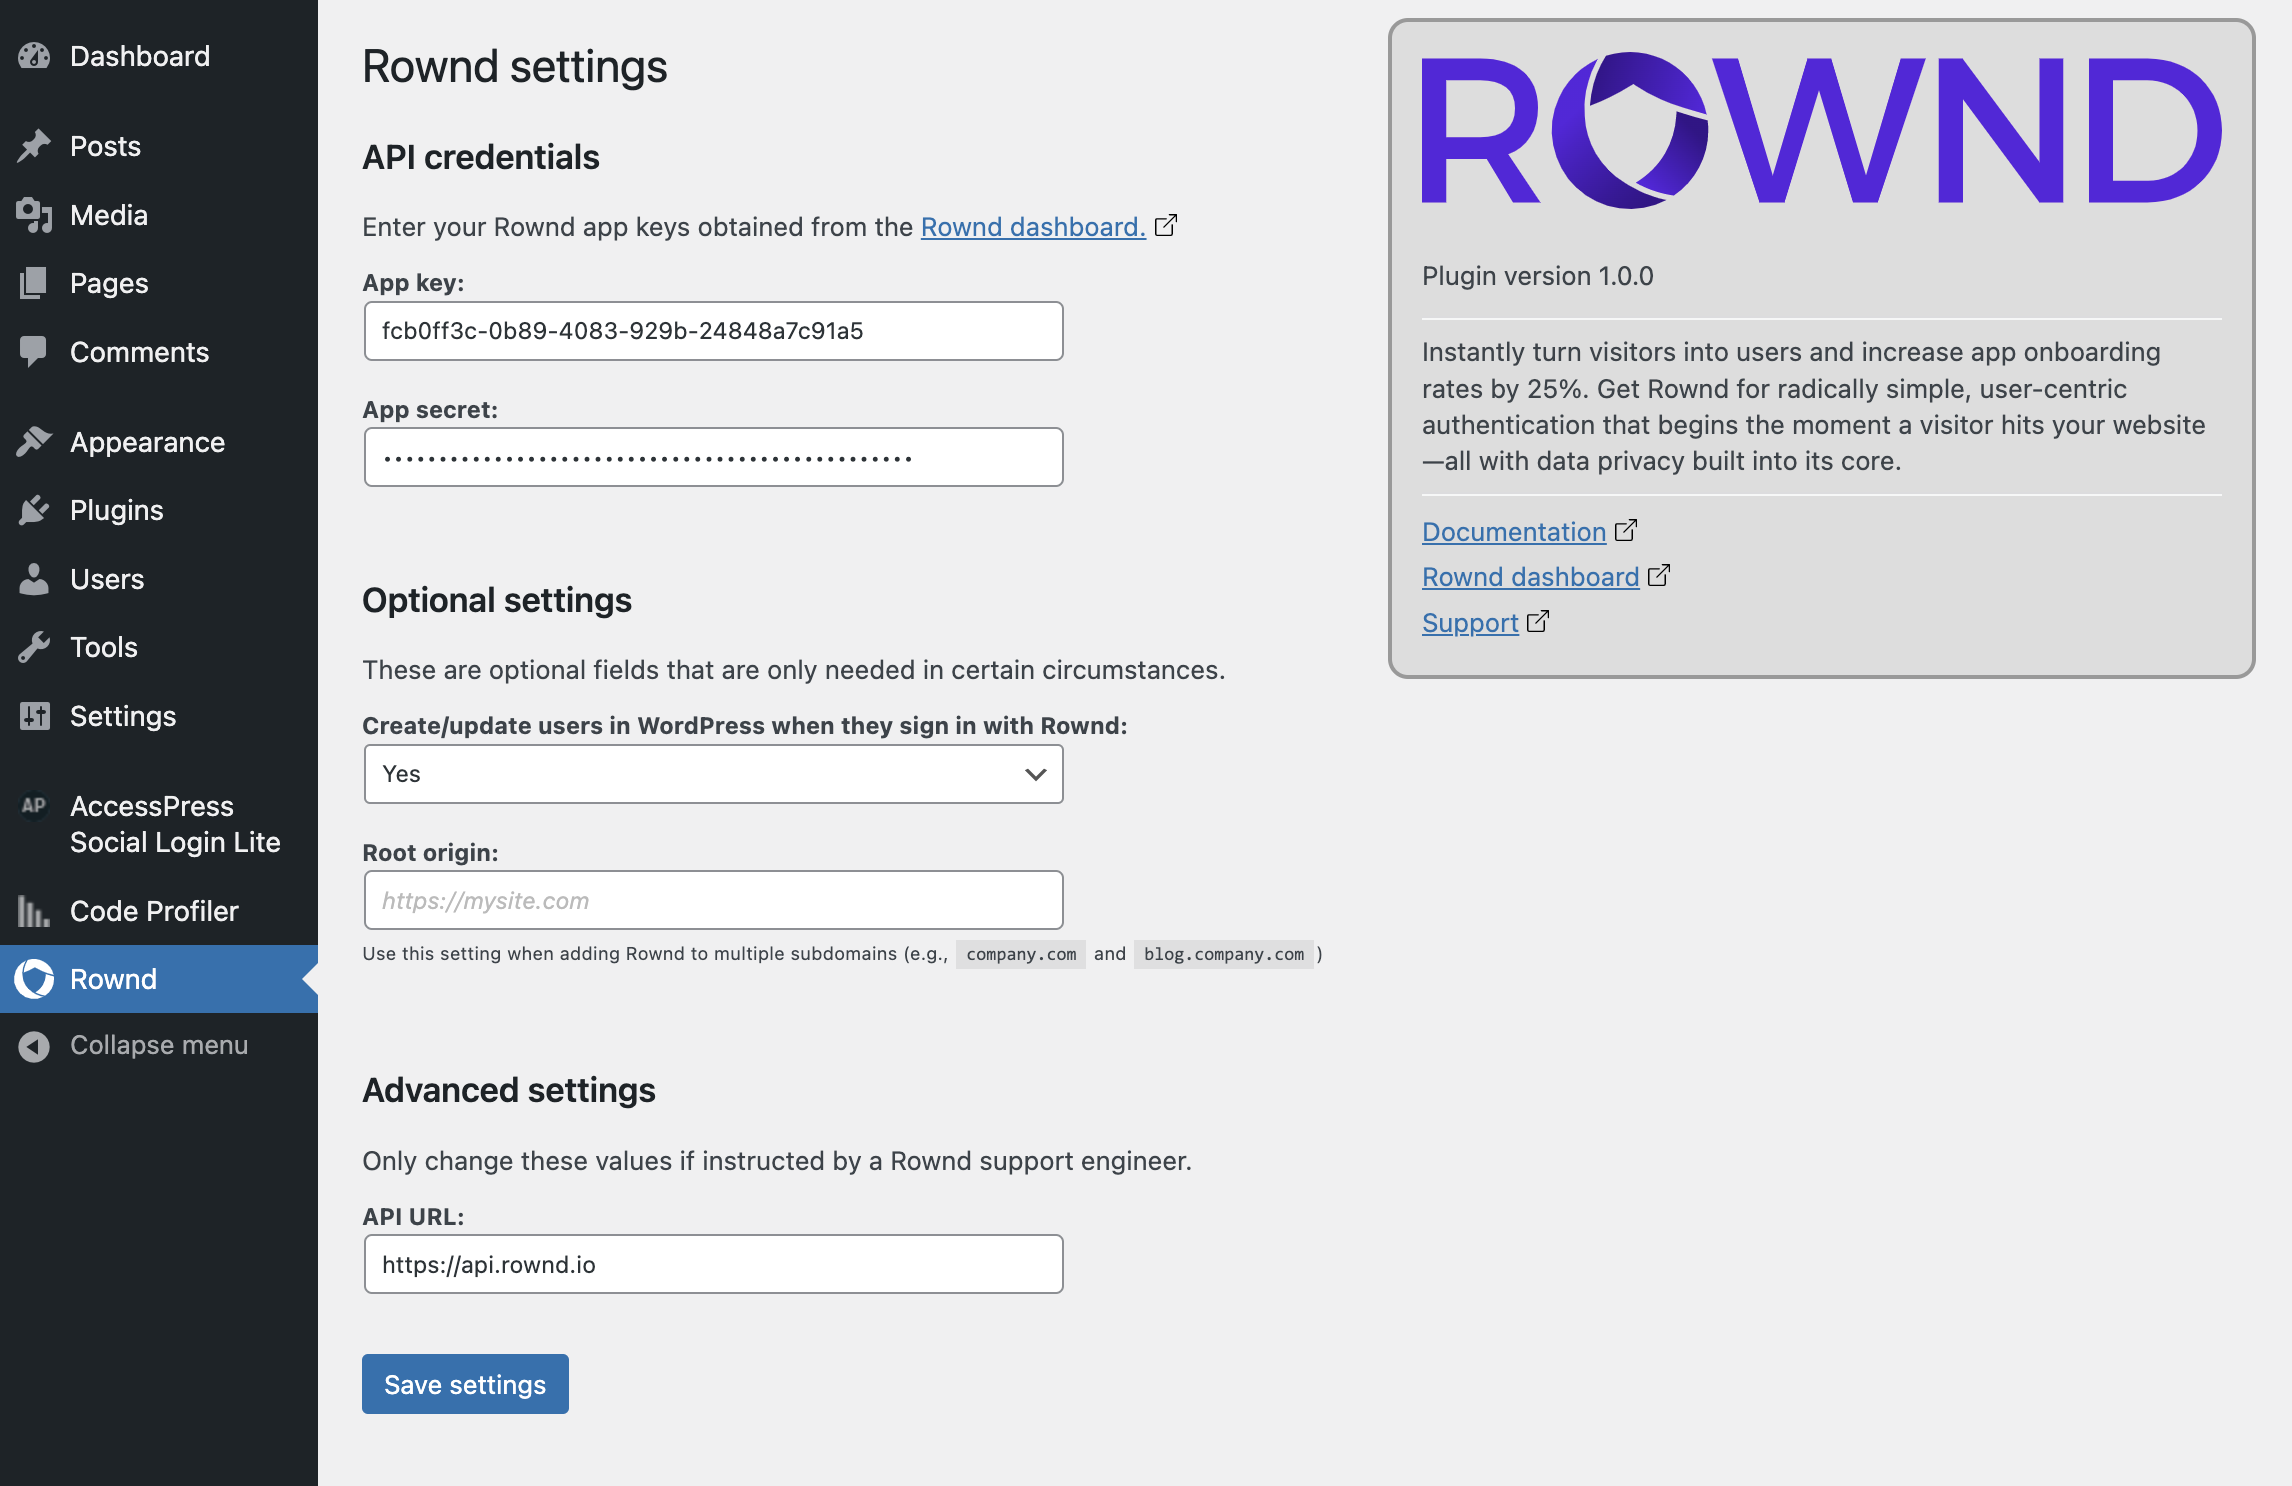 Manage your Rownd integration easily through our simple settings pane.